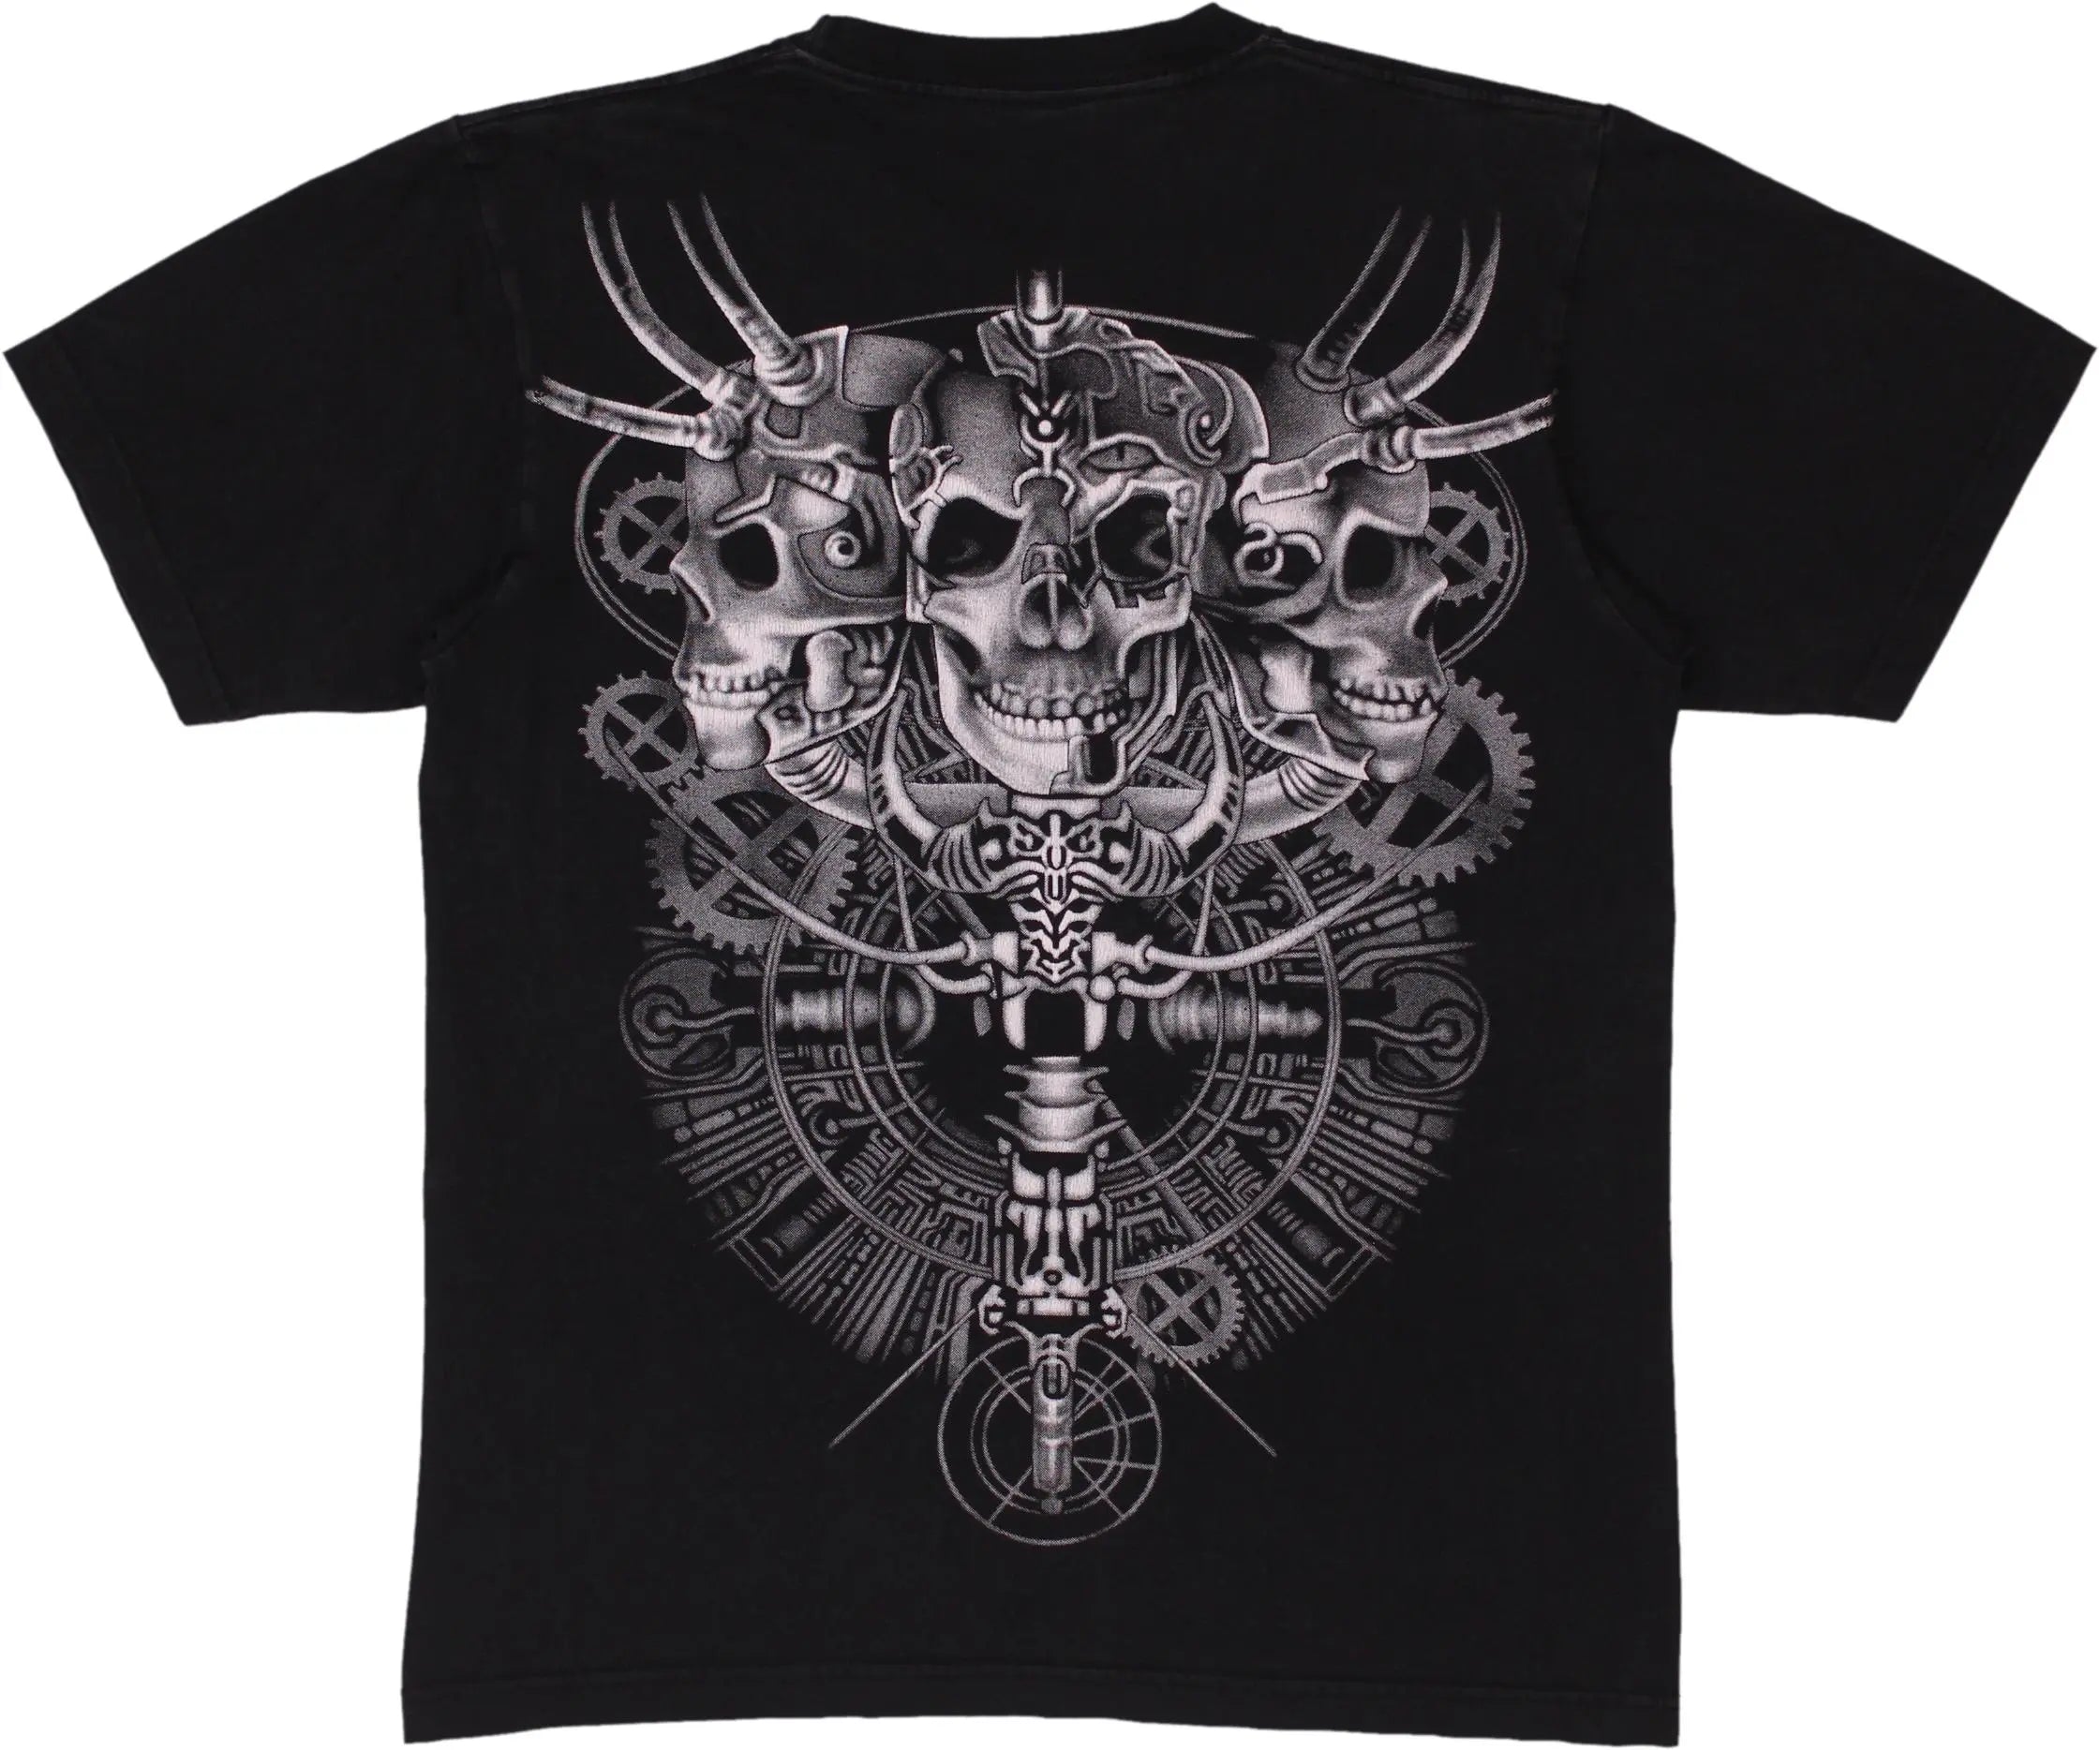 REO - Skulls T-shirt by REO Rock of the T-shirts- ThriftTale.com - Vintage and second handclothing